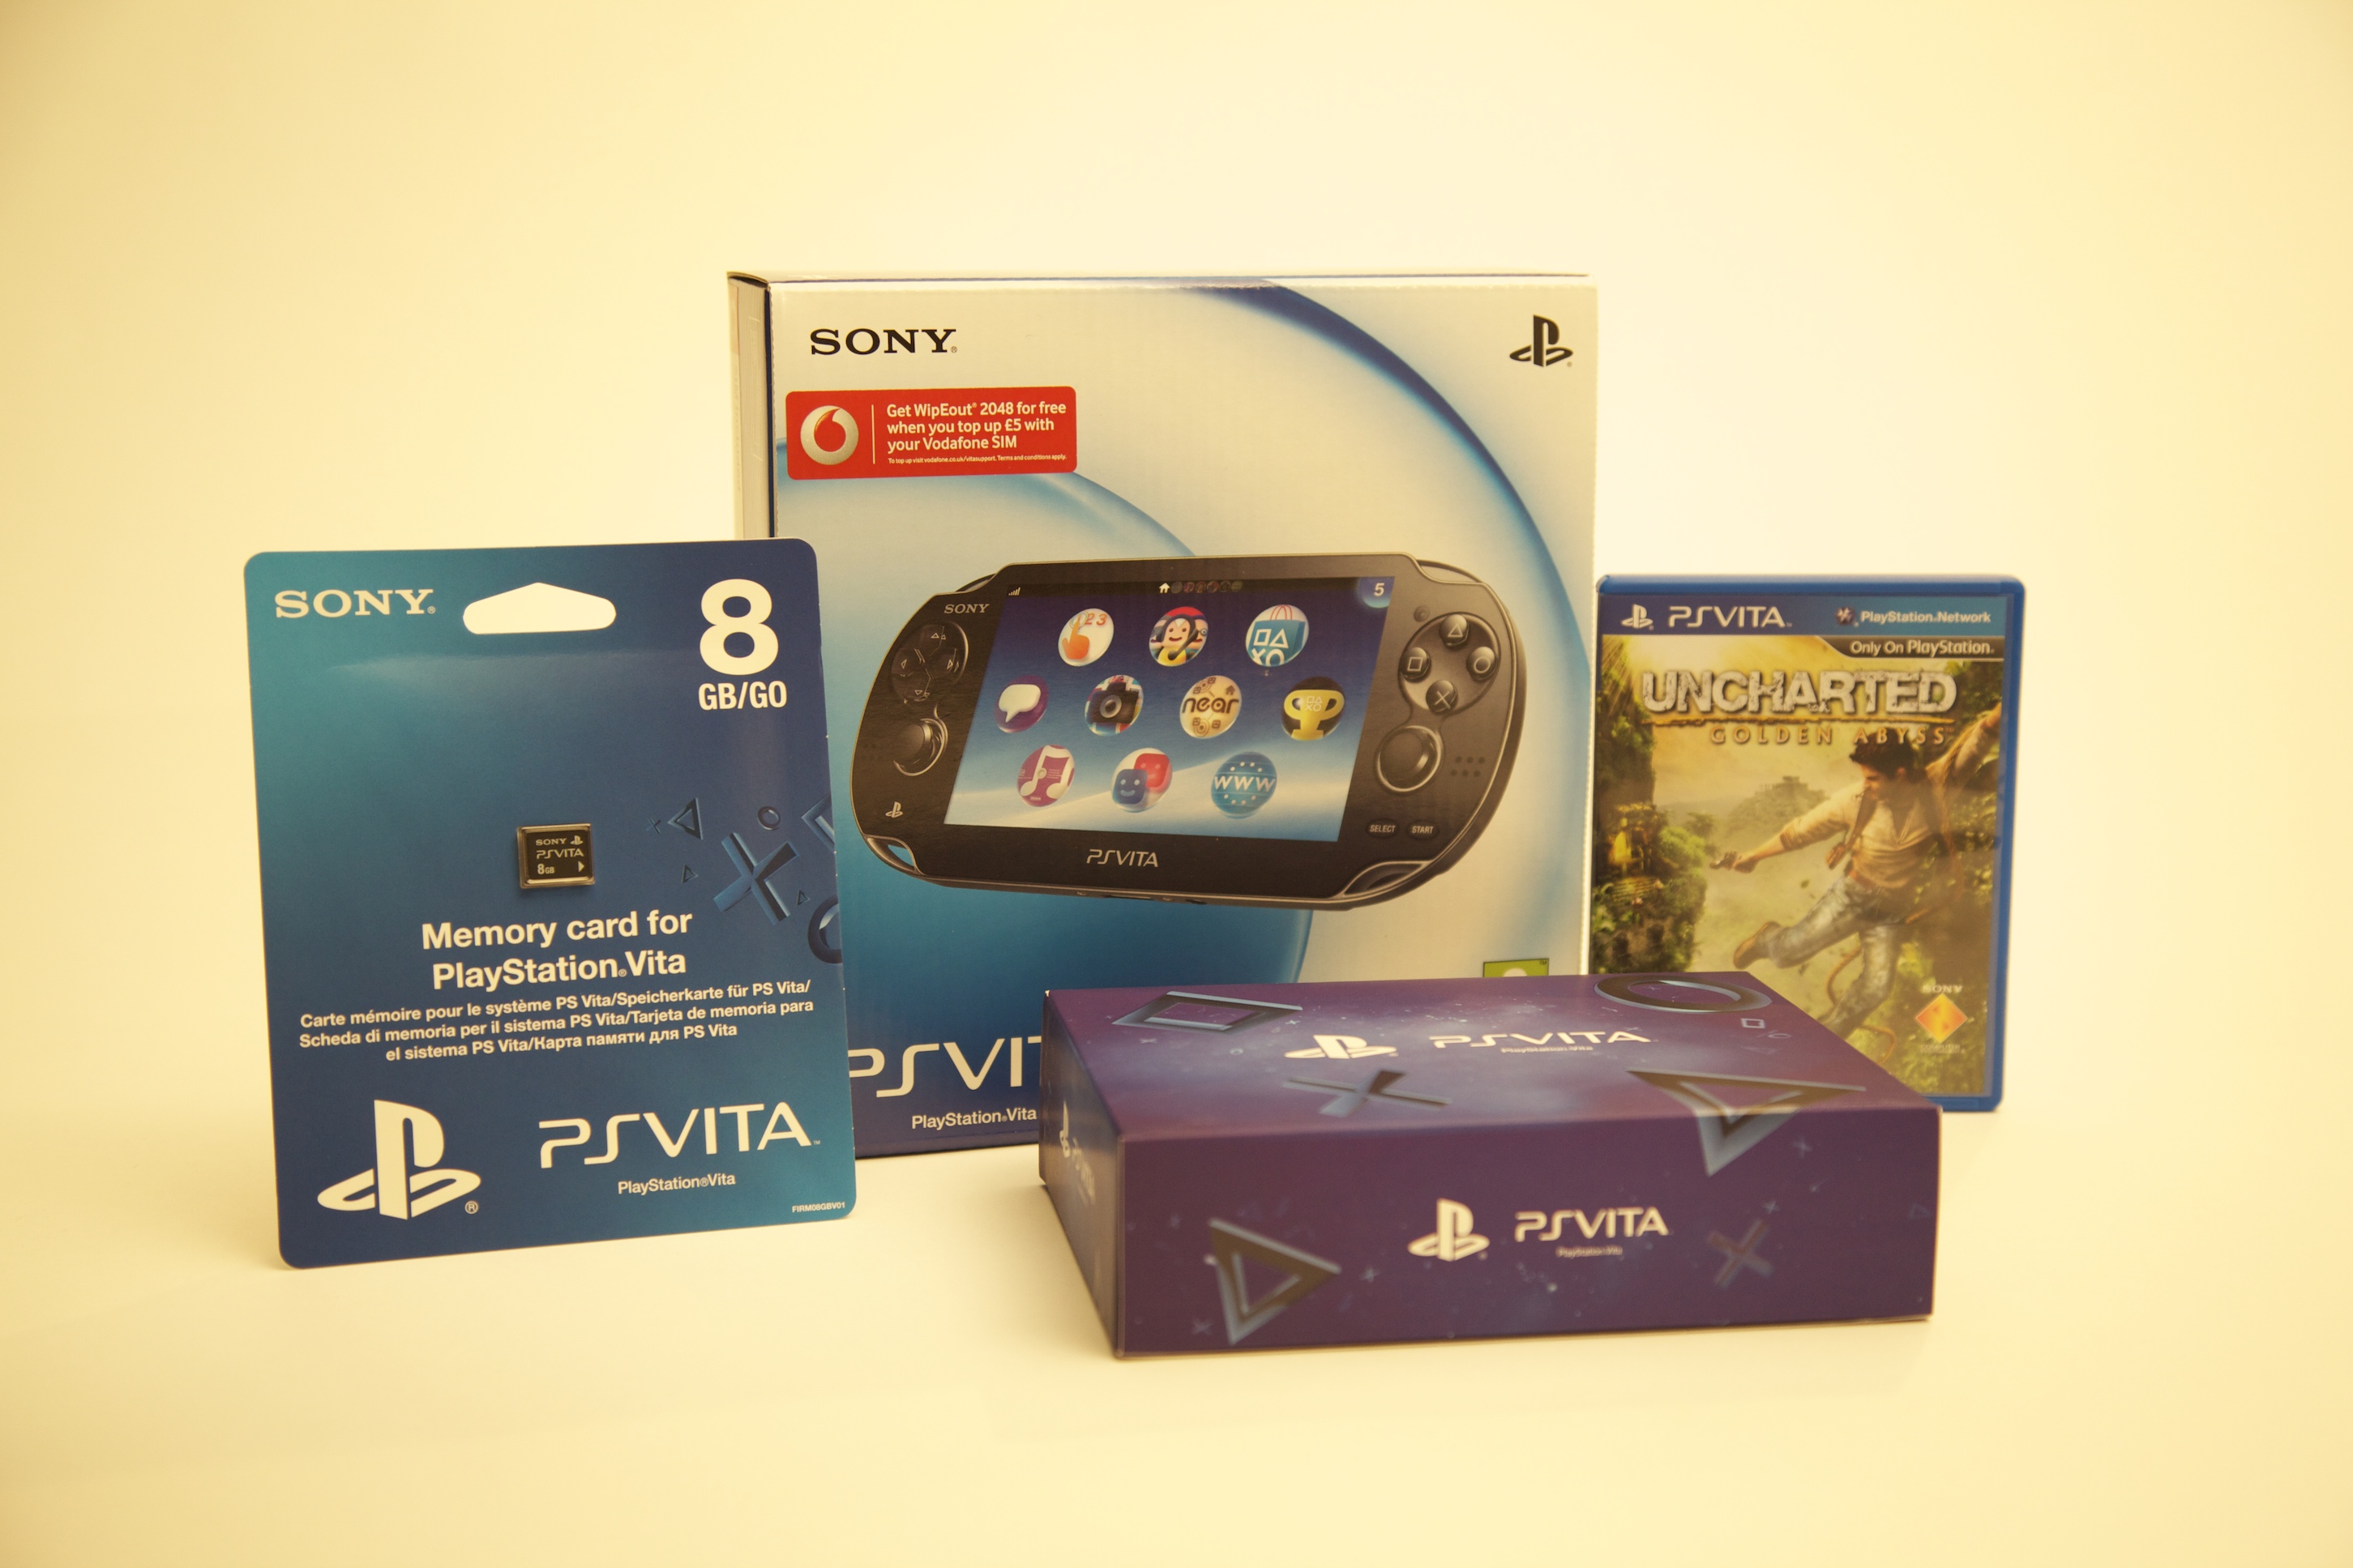 PS Vita 3G + Wi-Fi, Pre-Order Pack and Uncharted: Golden Abyss: Photo Gallery